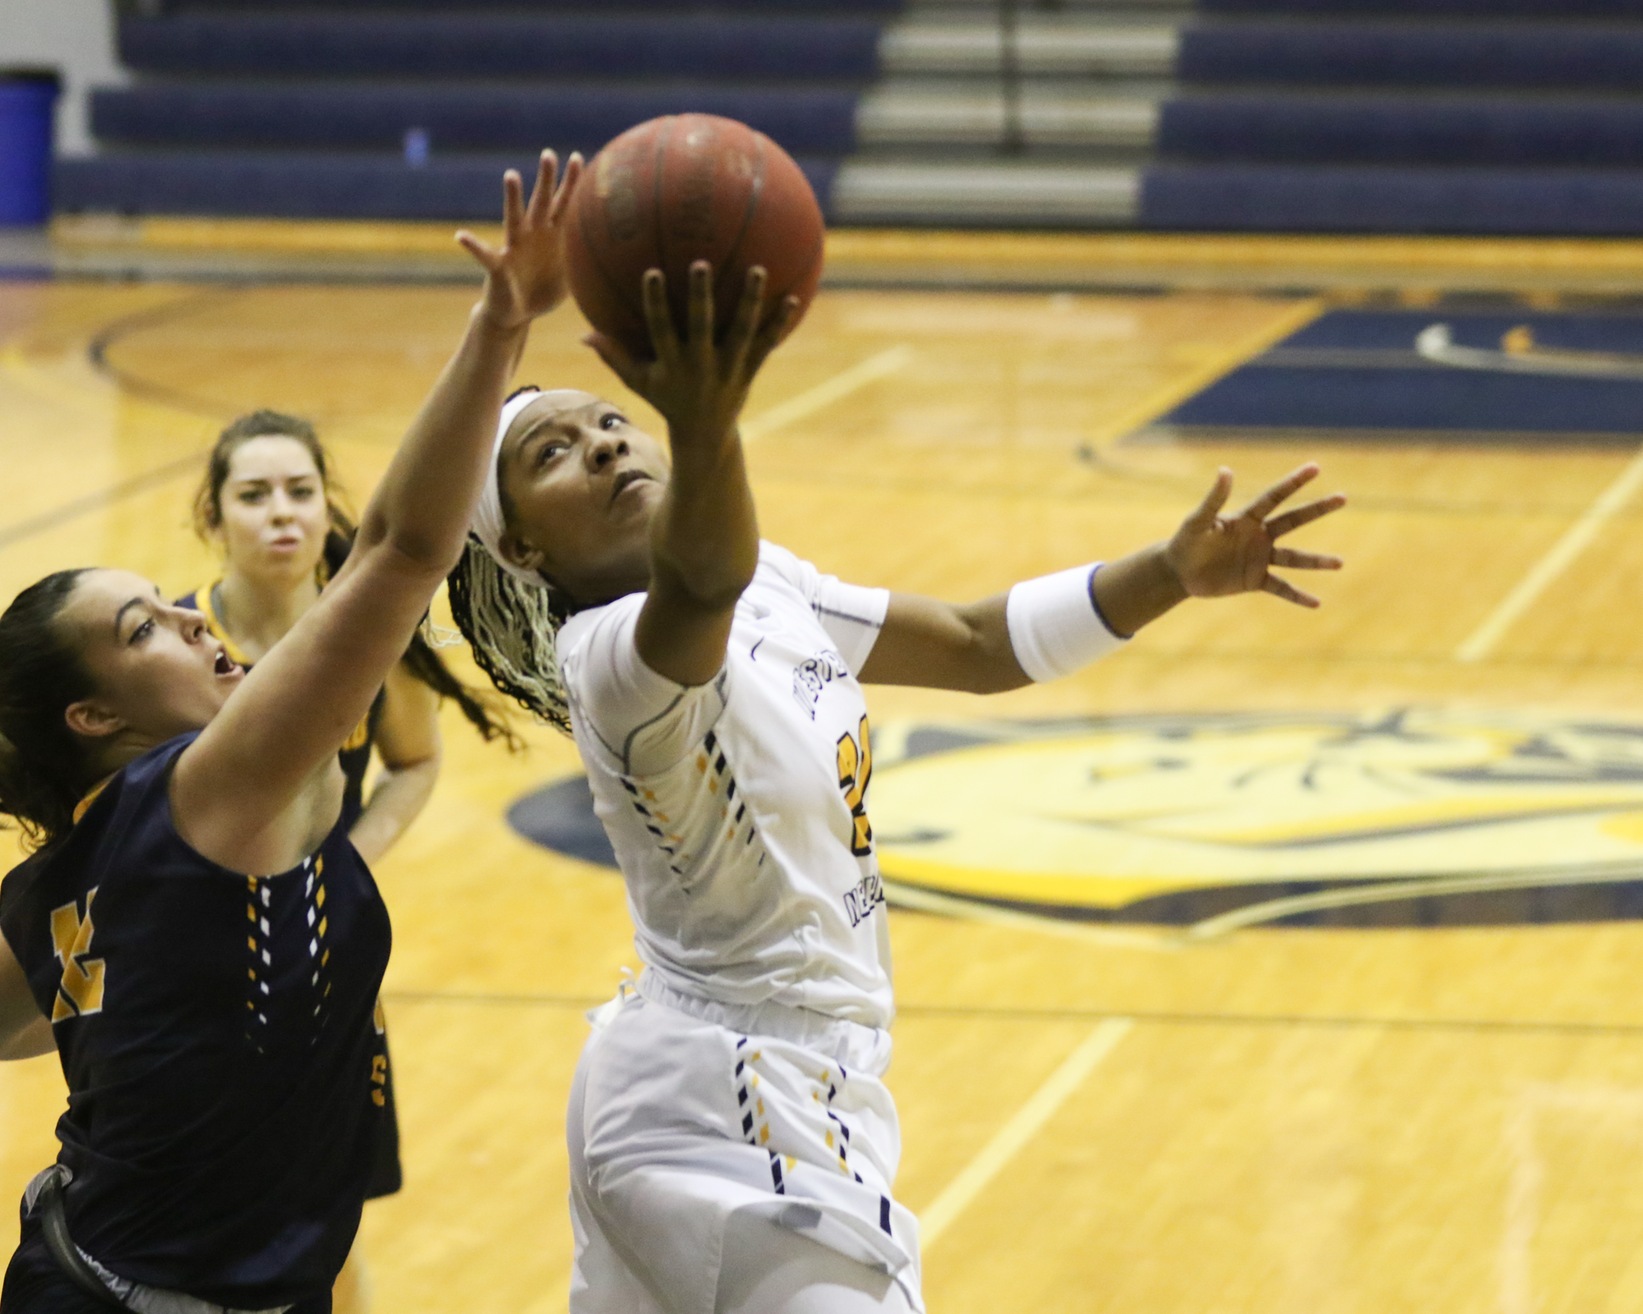 WNCC women capture 19th win over Trinidad